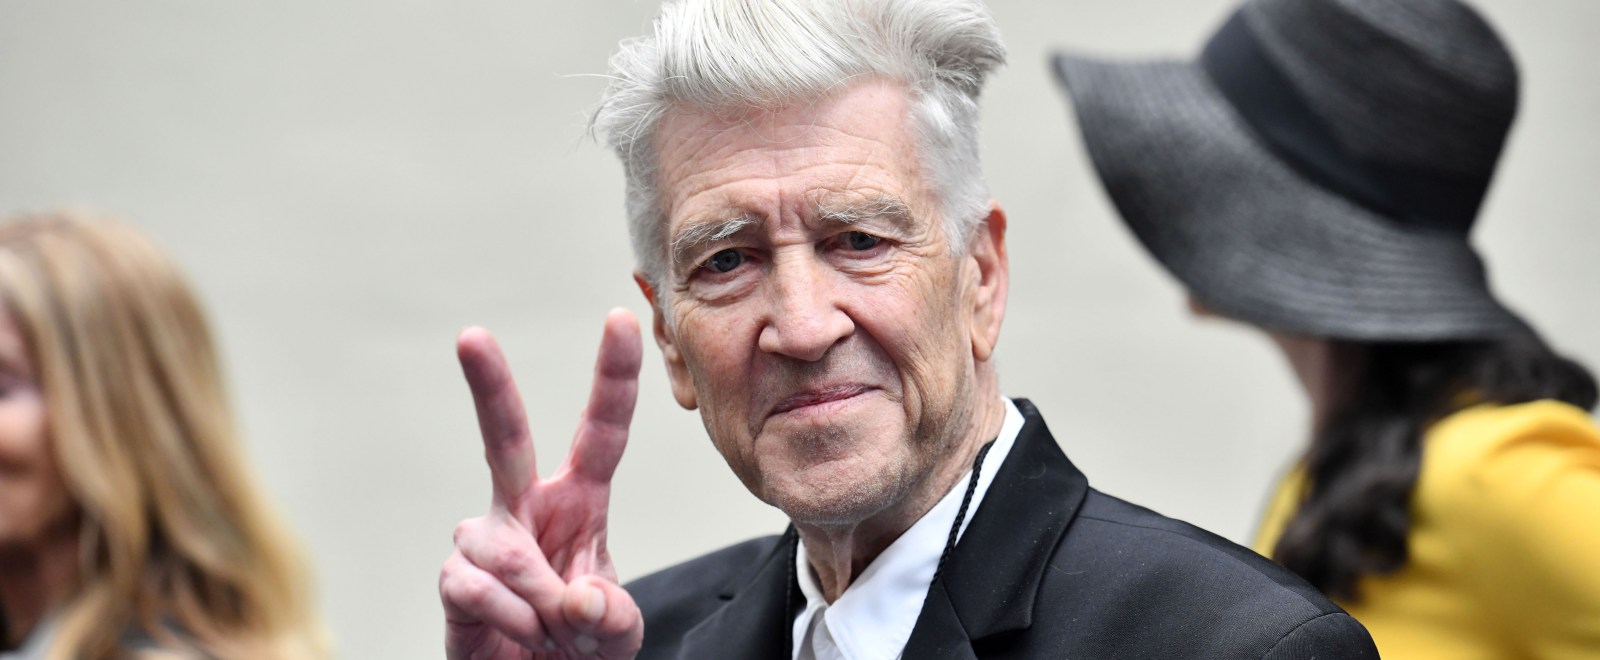 Someone Please Let David Lynch Make His Animated Movie With The Writer Of ‘The Nightmare Before Christmas’